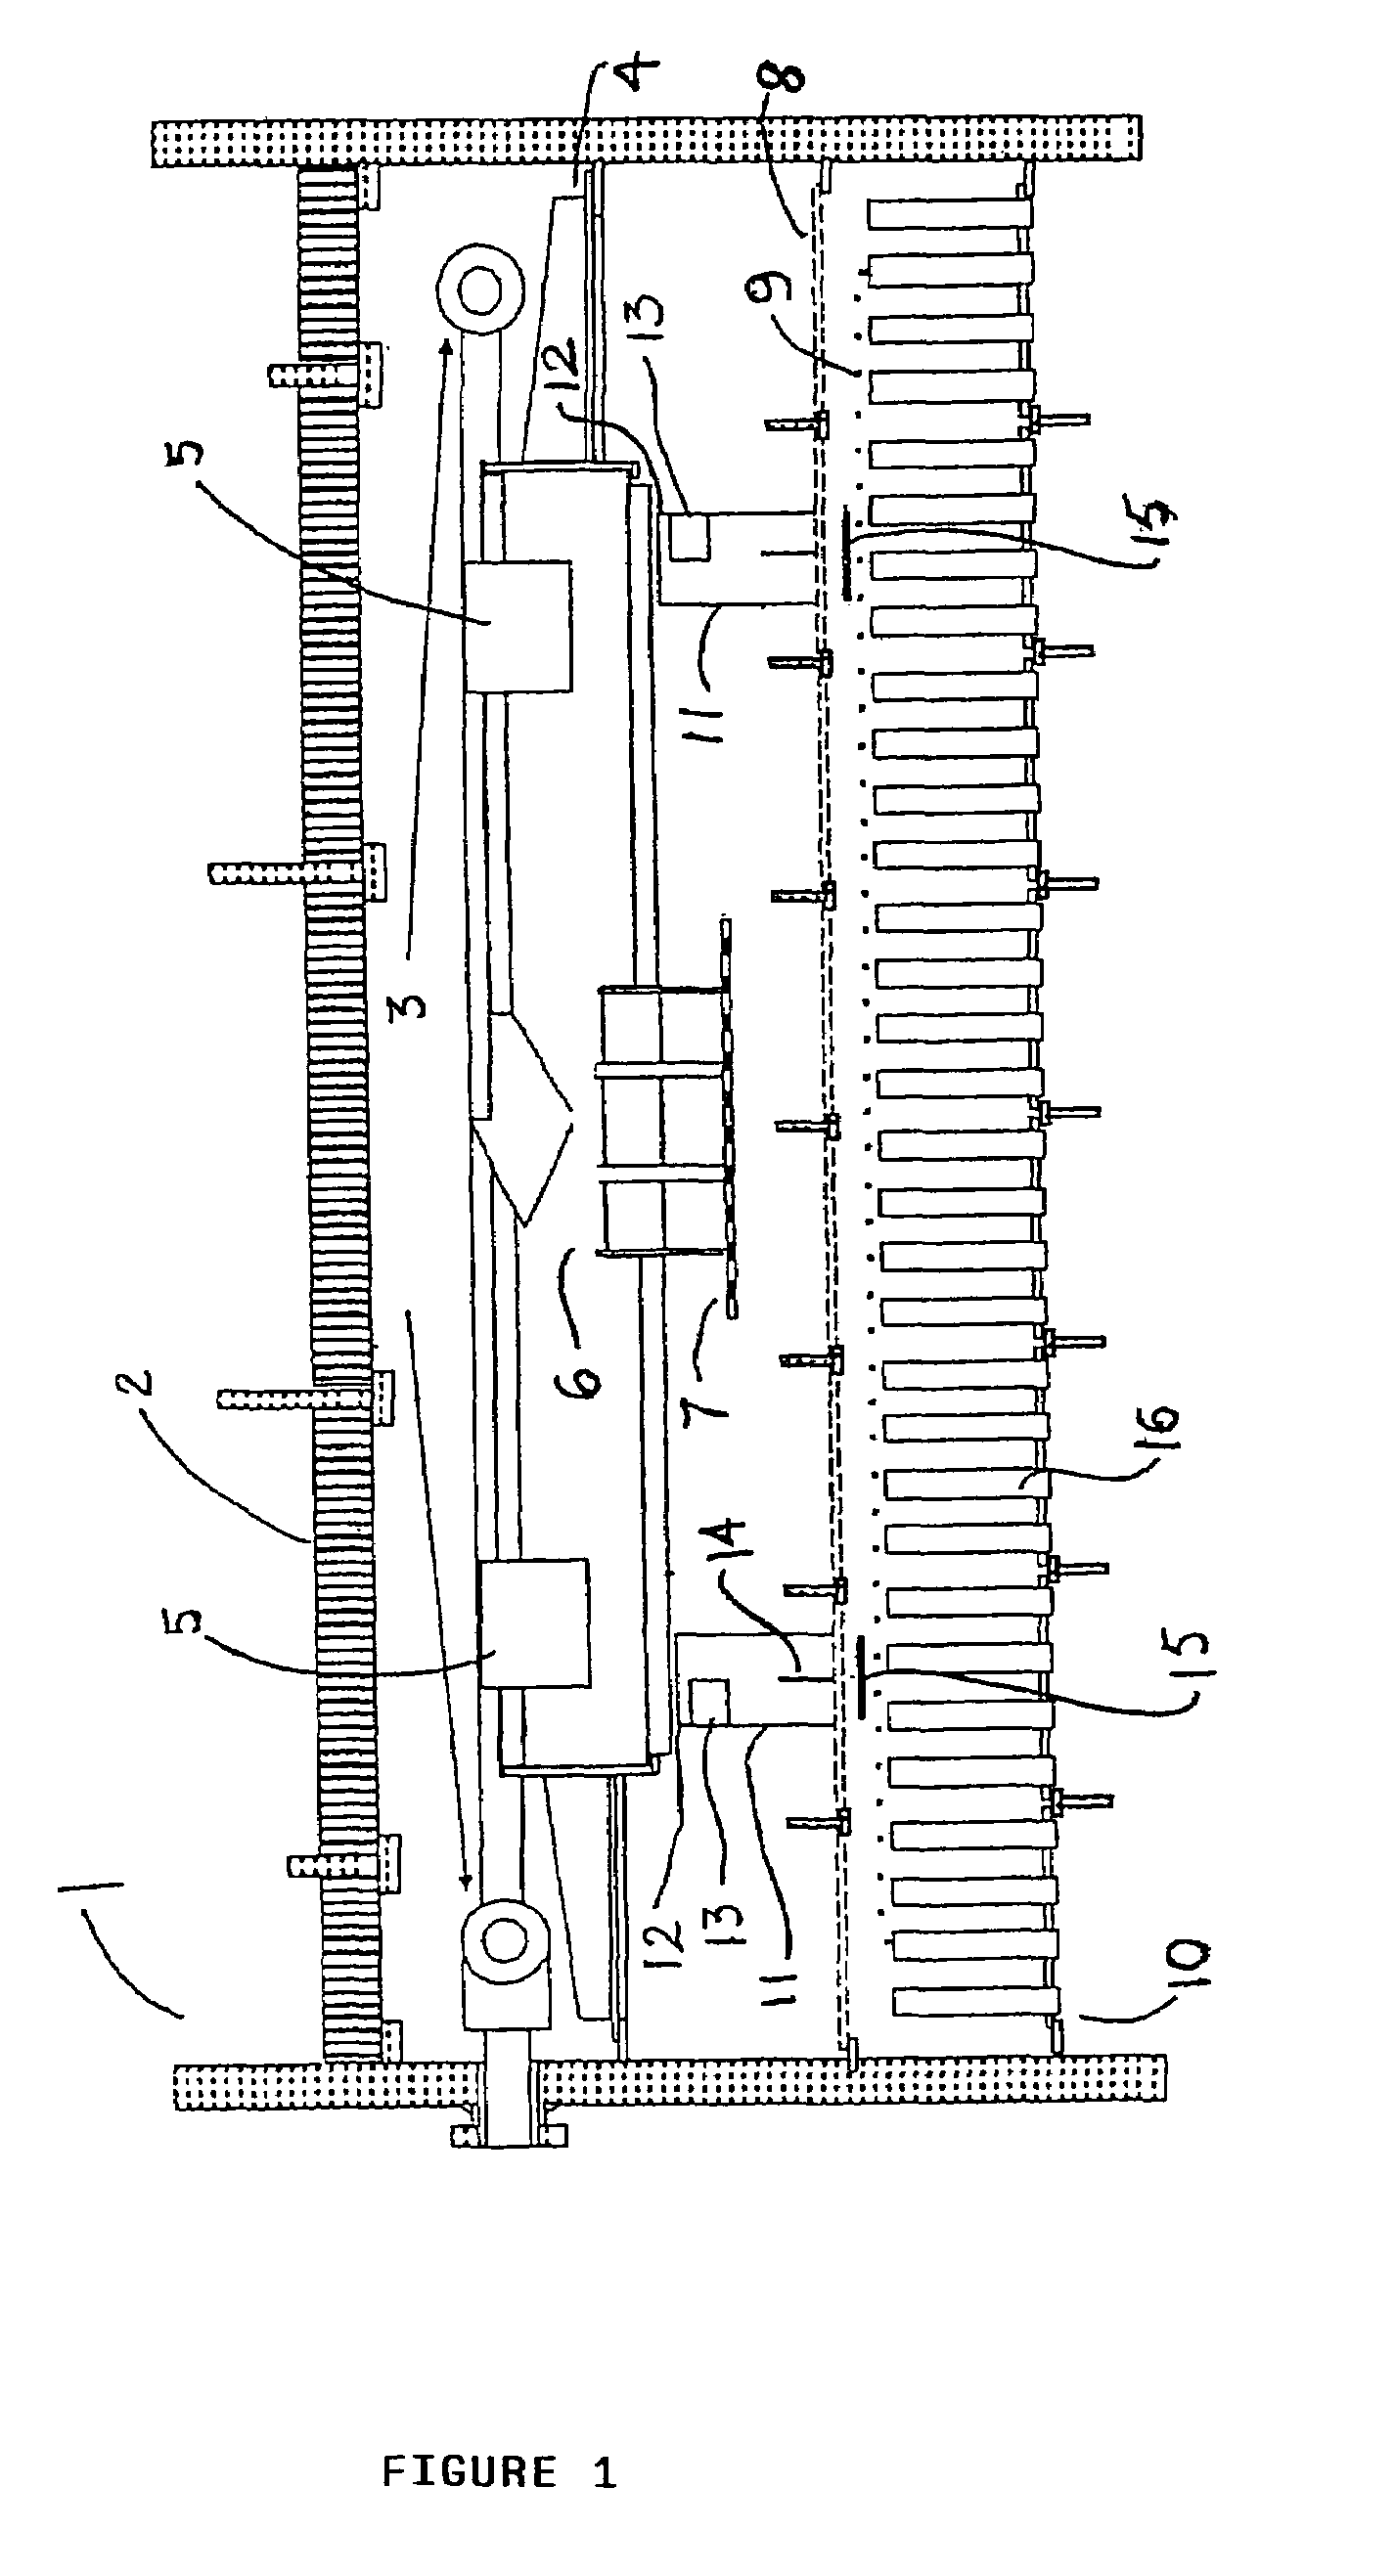 Distributor system for downflow reactors